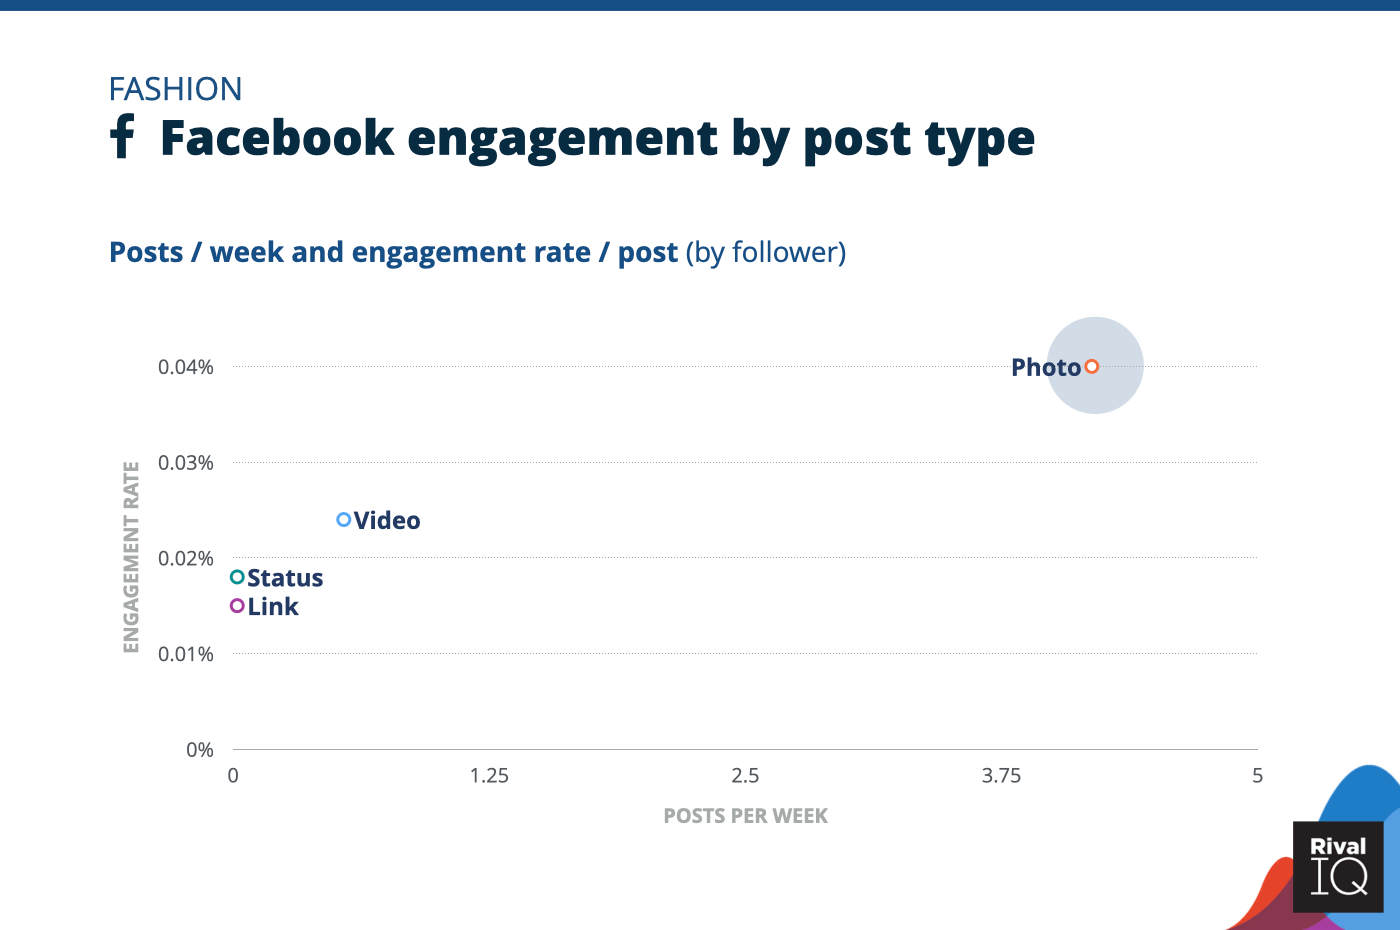 Chart of Facebook posts per week and engagement rate by post type, Fashion